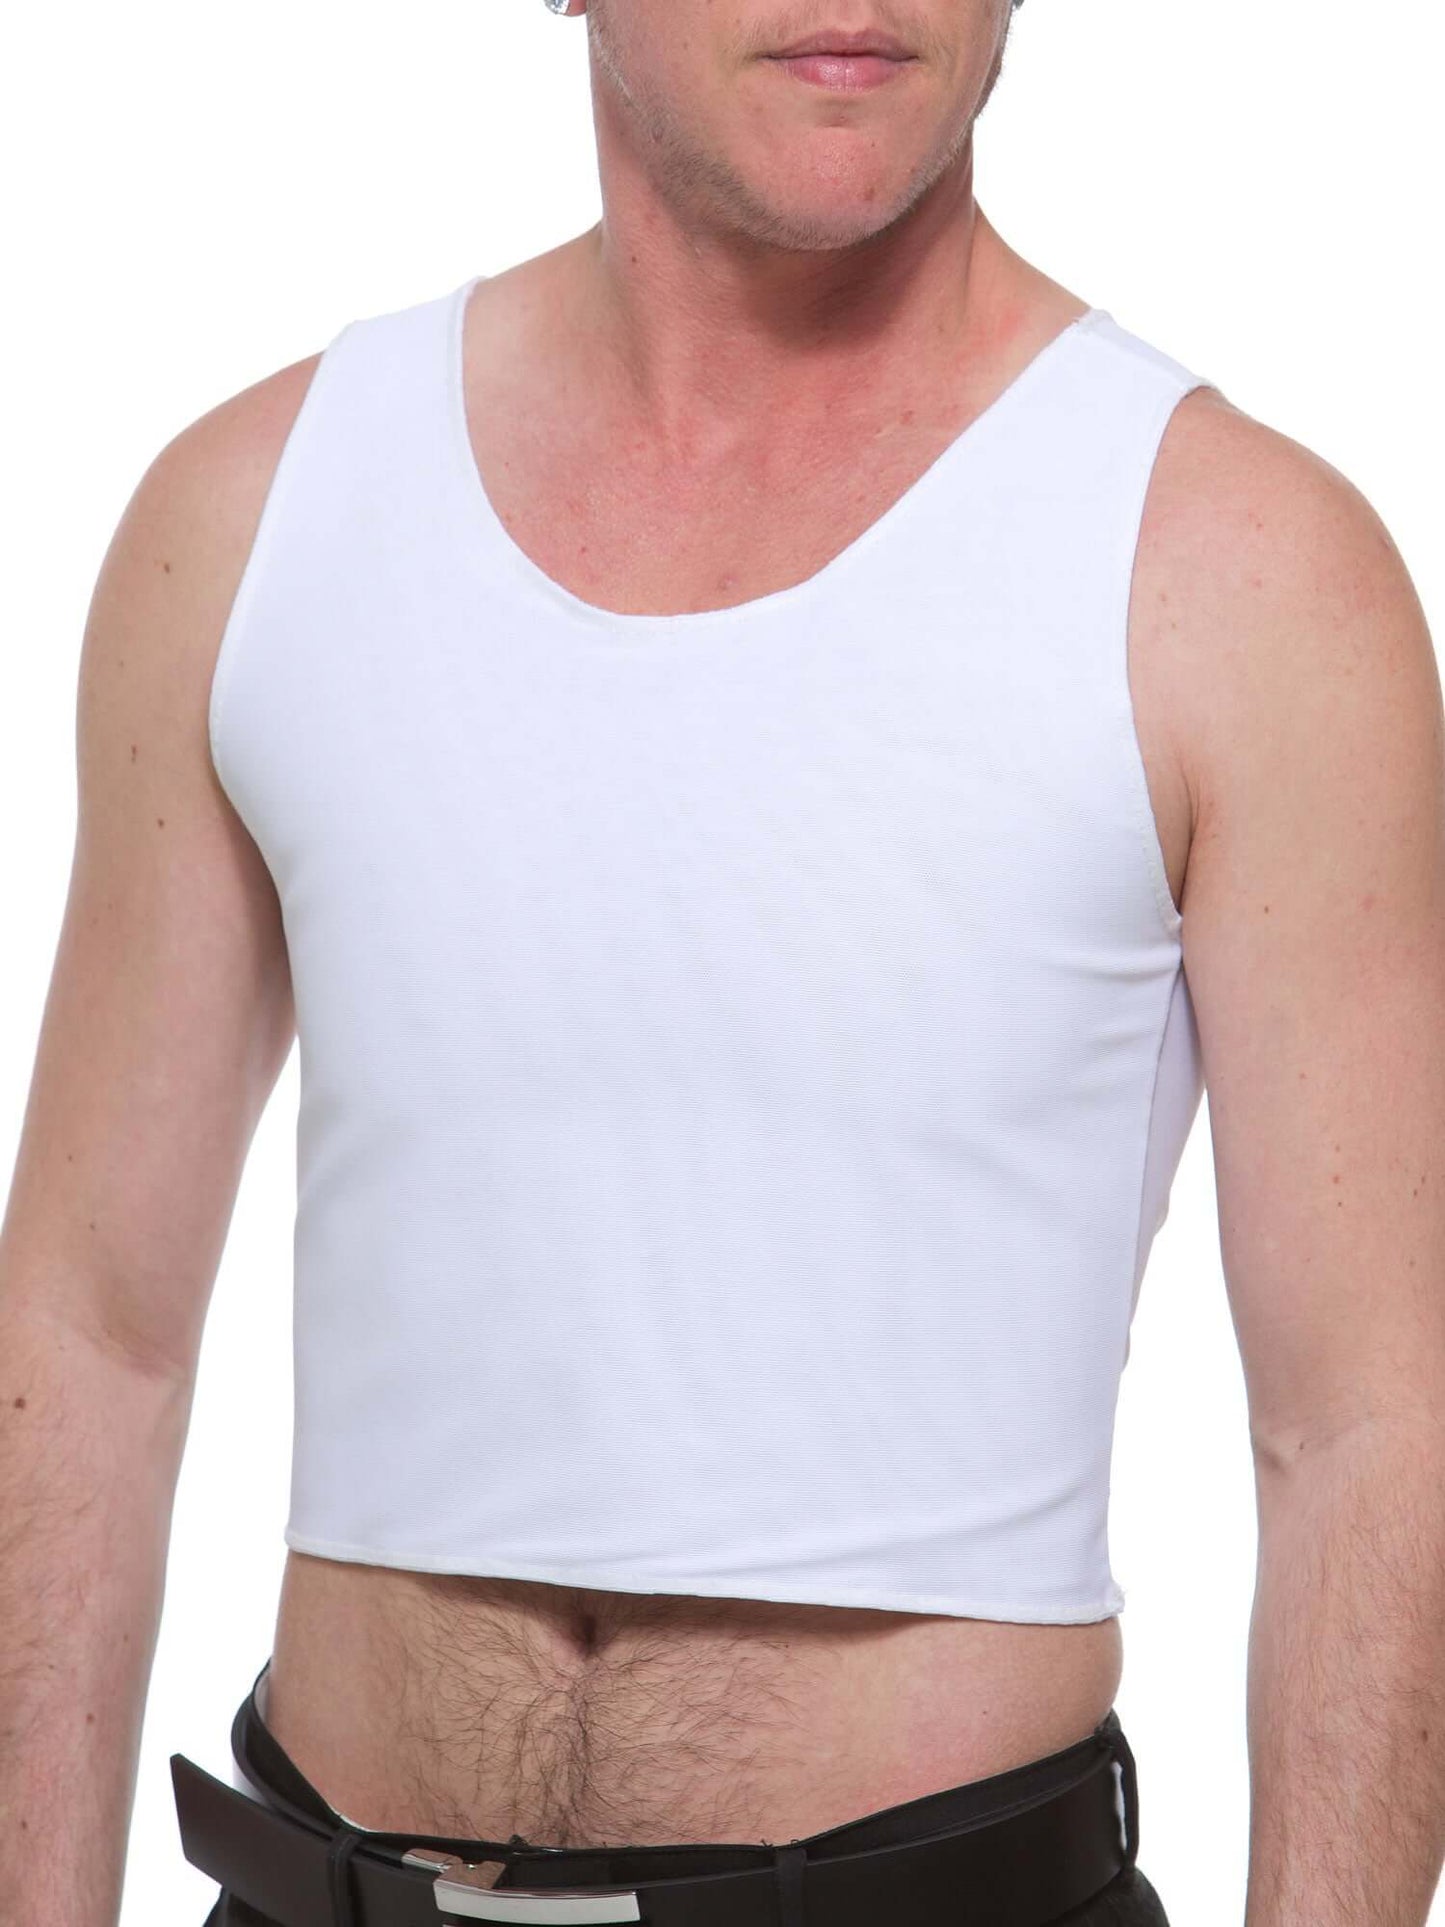 Binder: Cotton-Lined Tri-Top White